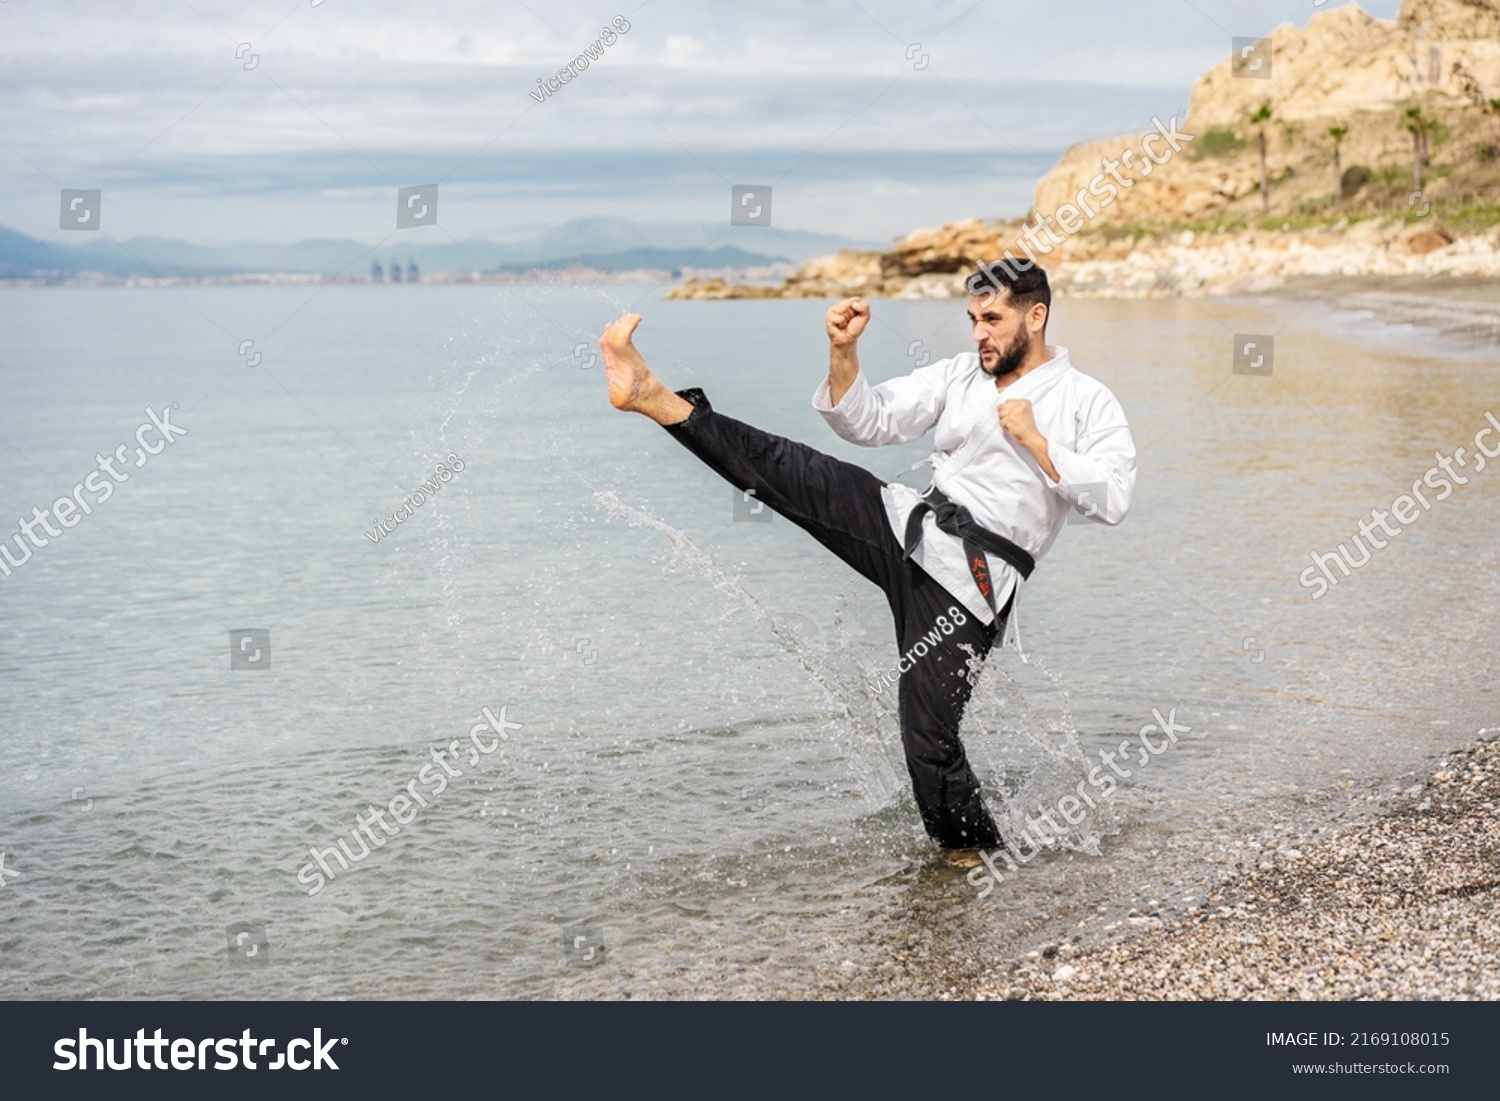 kung fu expert wearing a kimono and a black belt with the word "bushido" written in Japanese, performing a side kick on the shore of the beach splashing drops of water.  #2169108015